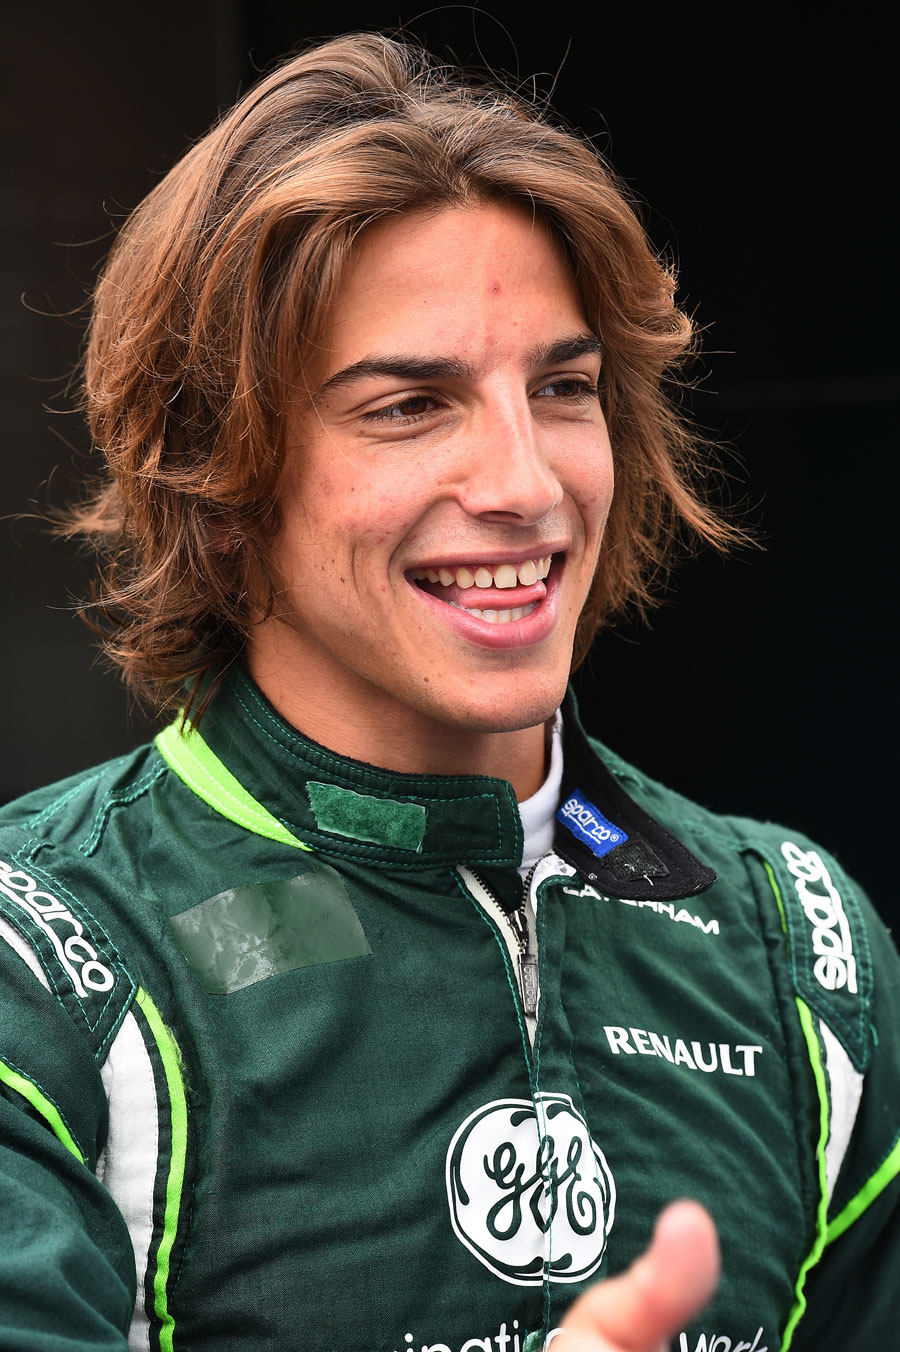 Roberto Merhi poses for the cameras in Caterham gear ahead of his debut F1 practice session